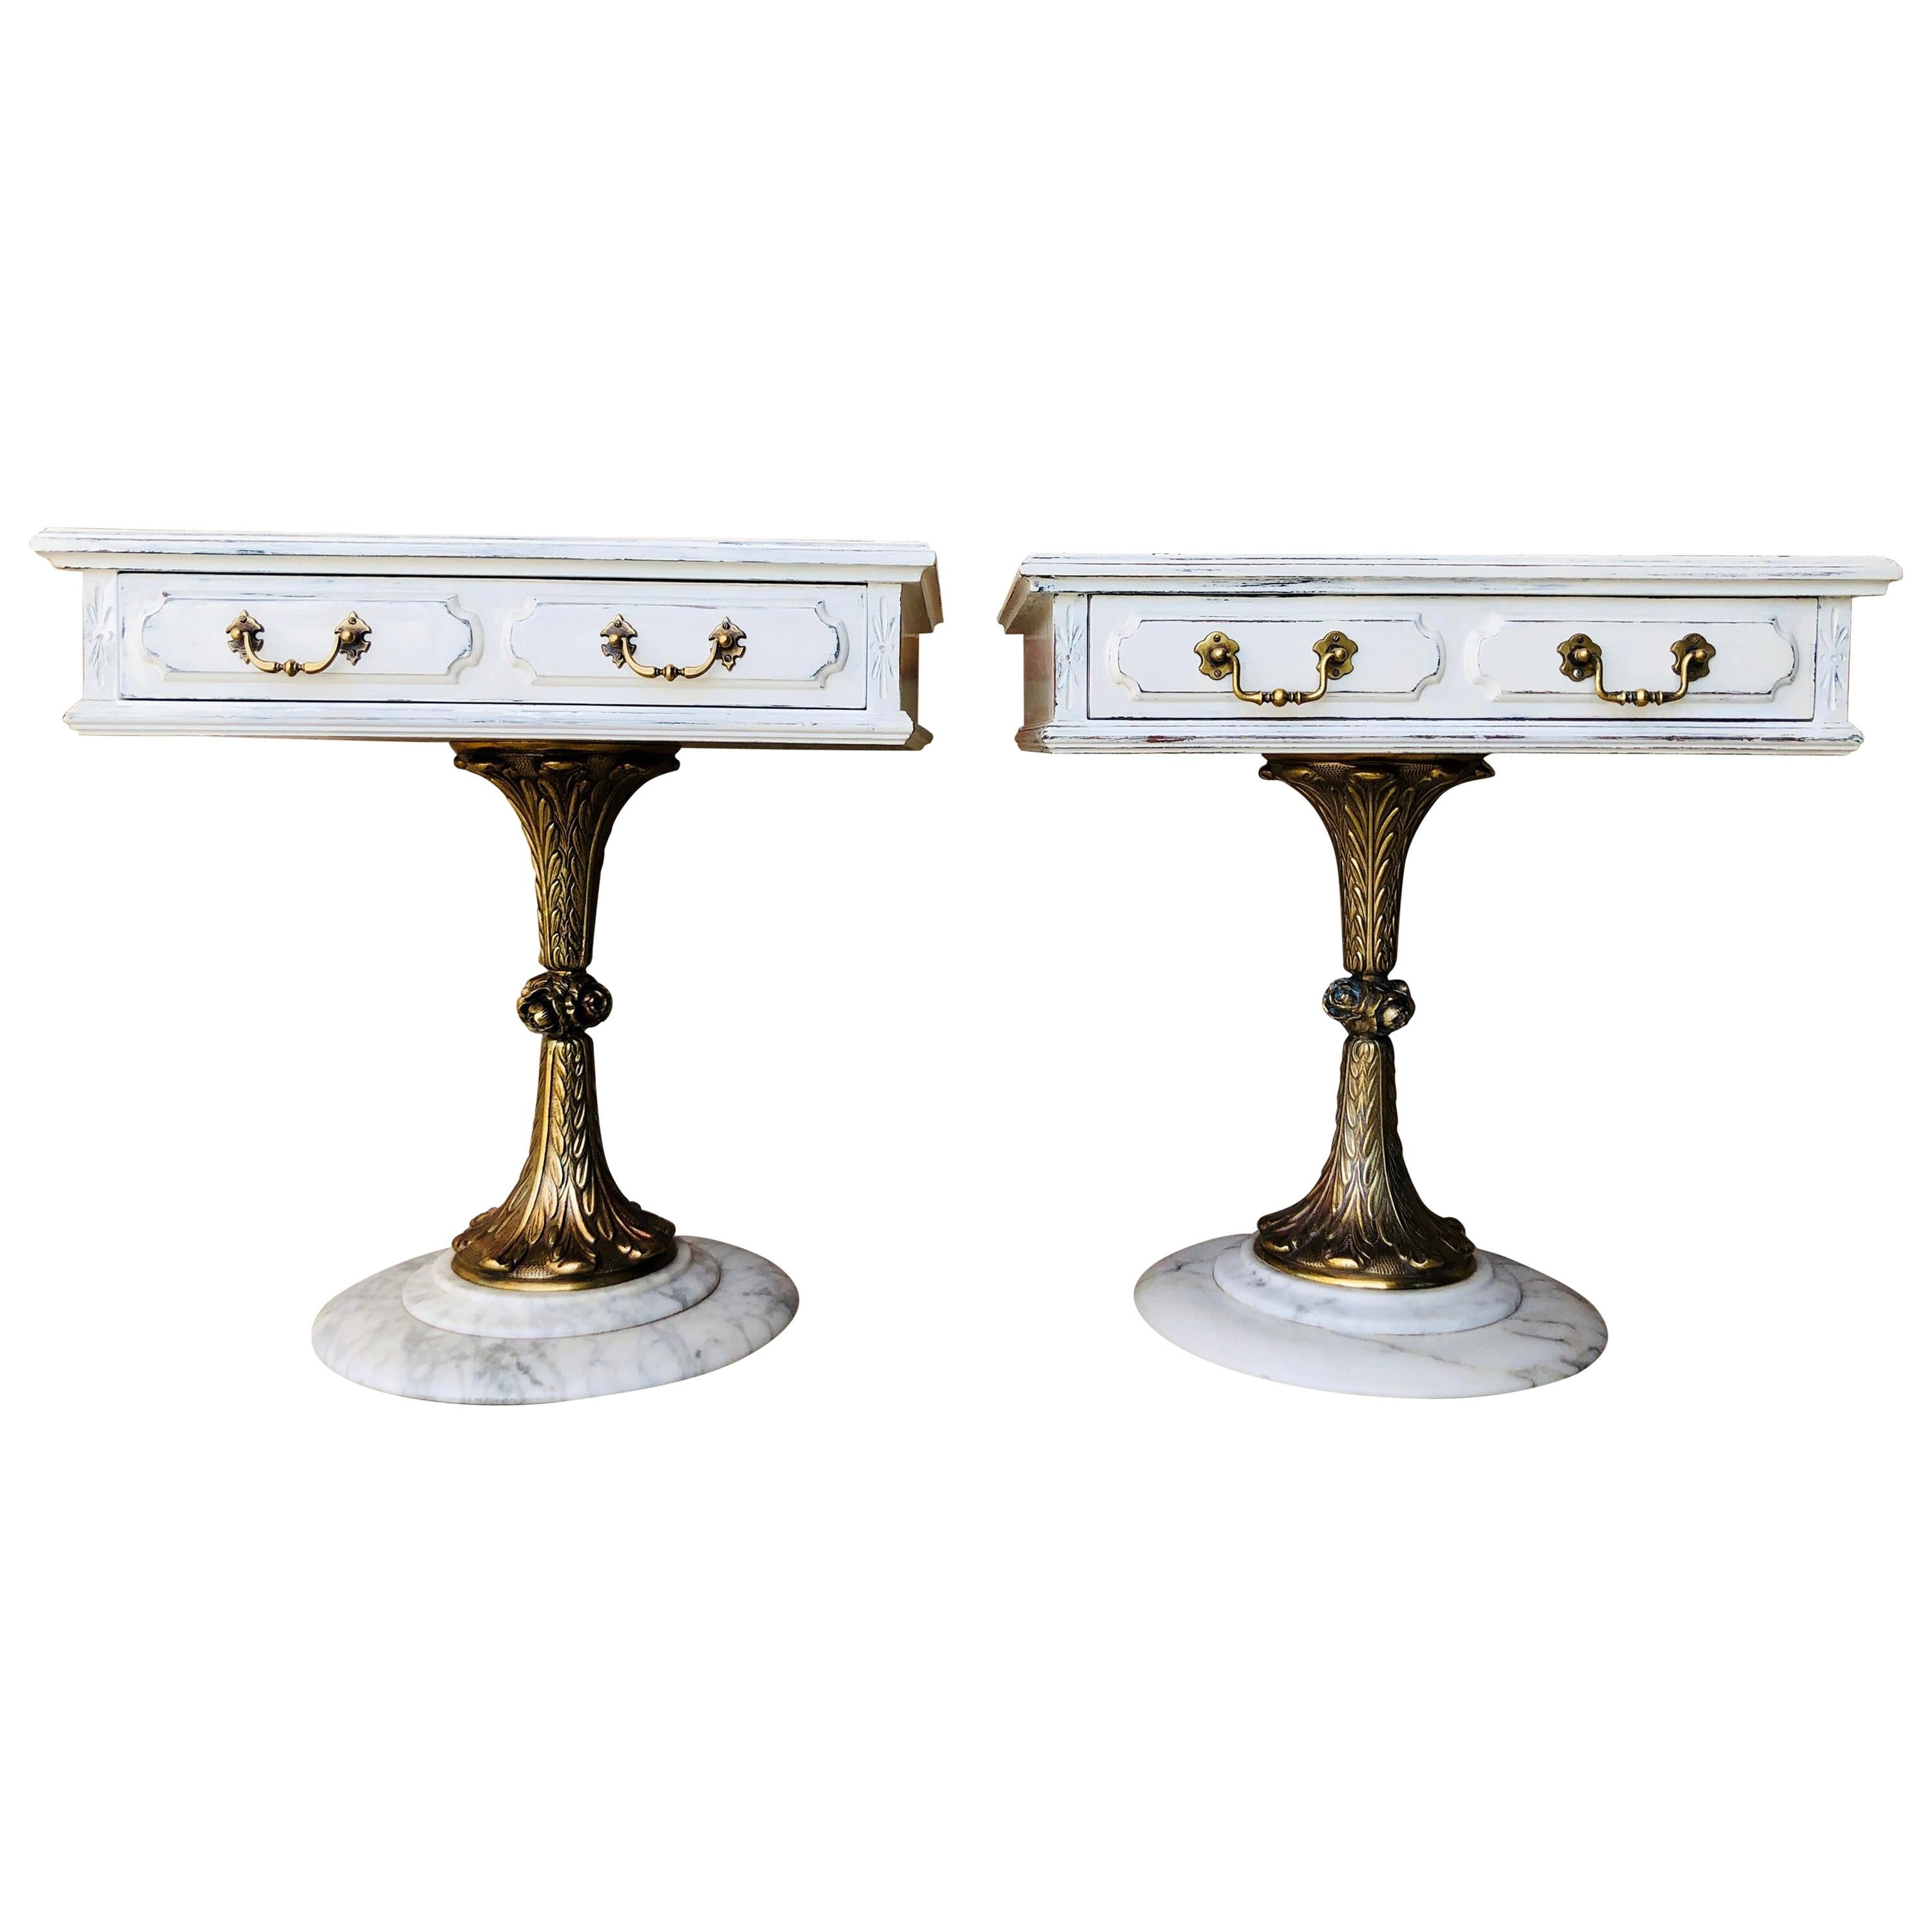 Pair of White Nightstands with One-Drawer and Bronze and Marble Pedestal